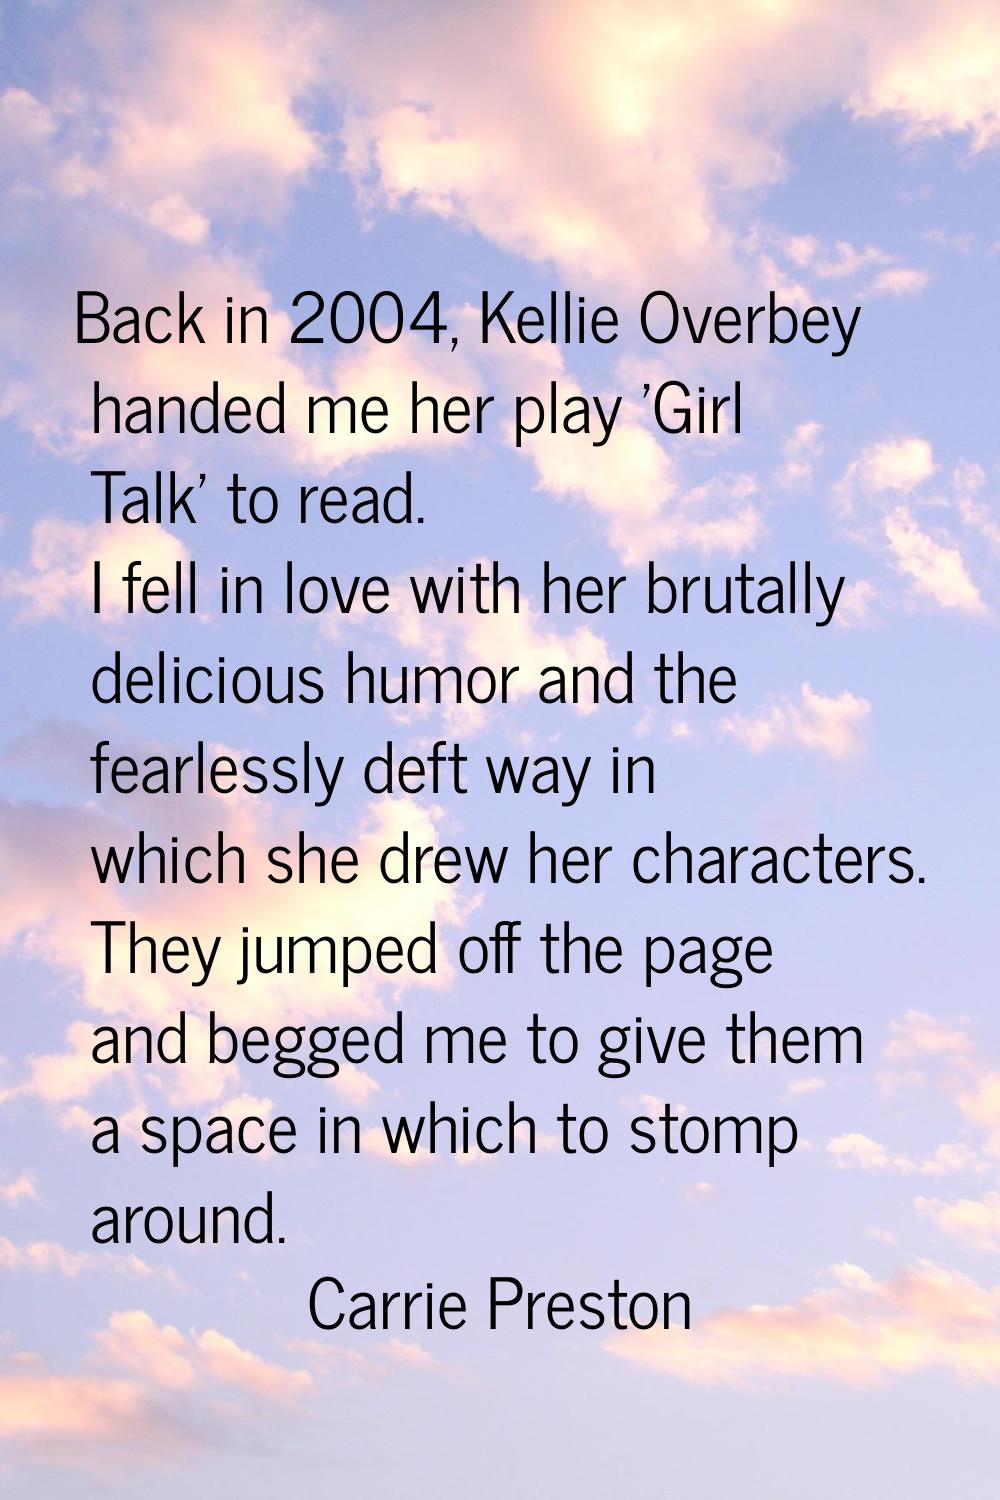 Back in 2004, Kellie Overbey handed me her play 'Girl Talk' to read. I fell in love with her brutal